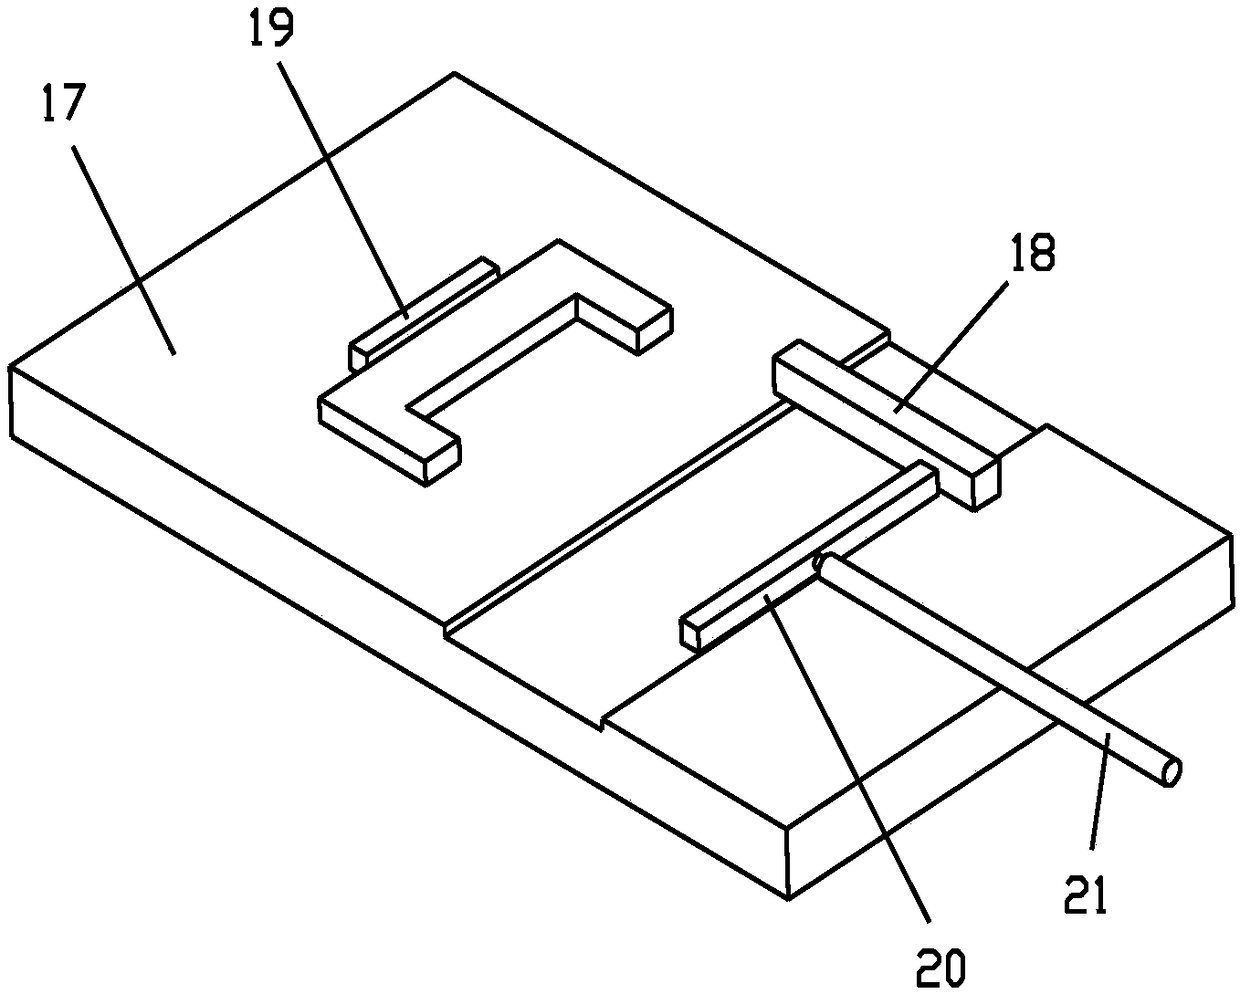 Universal automatic detection system for connectors